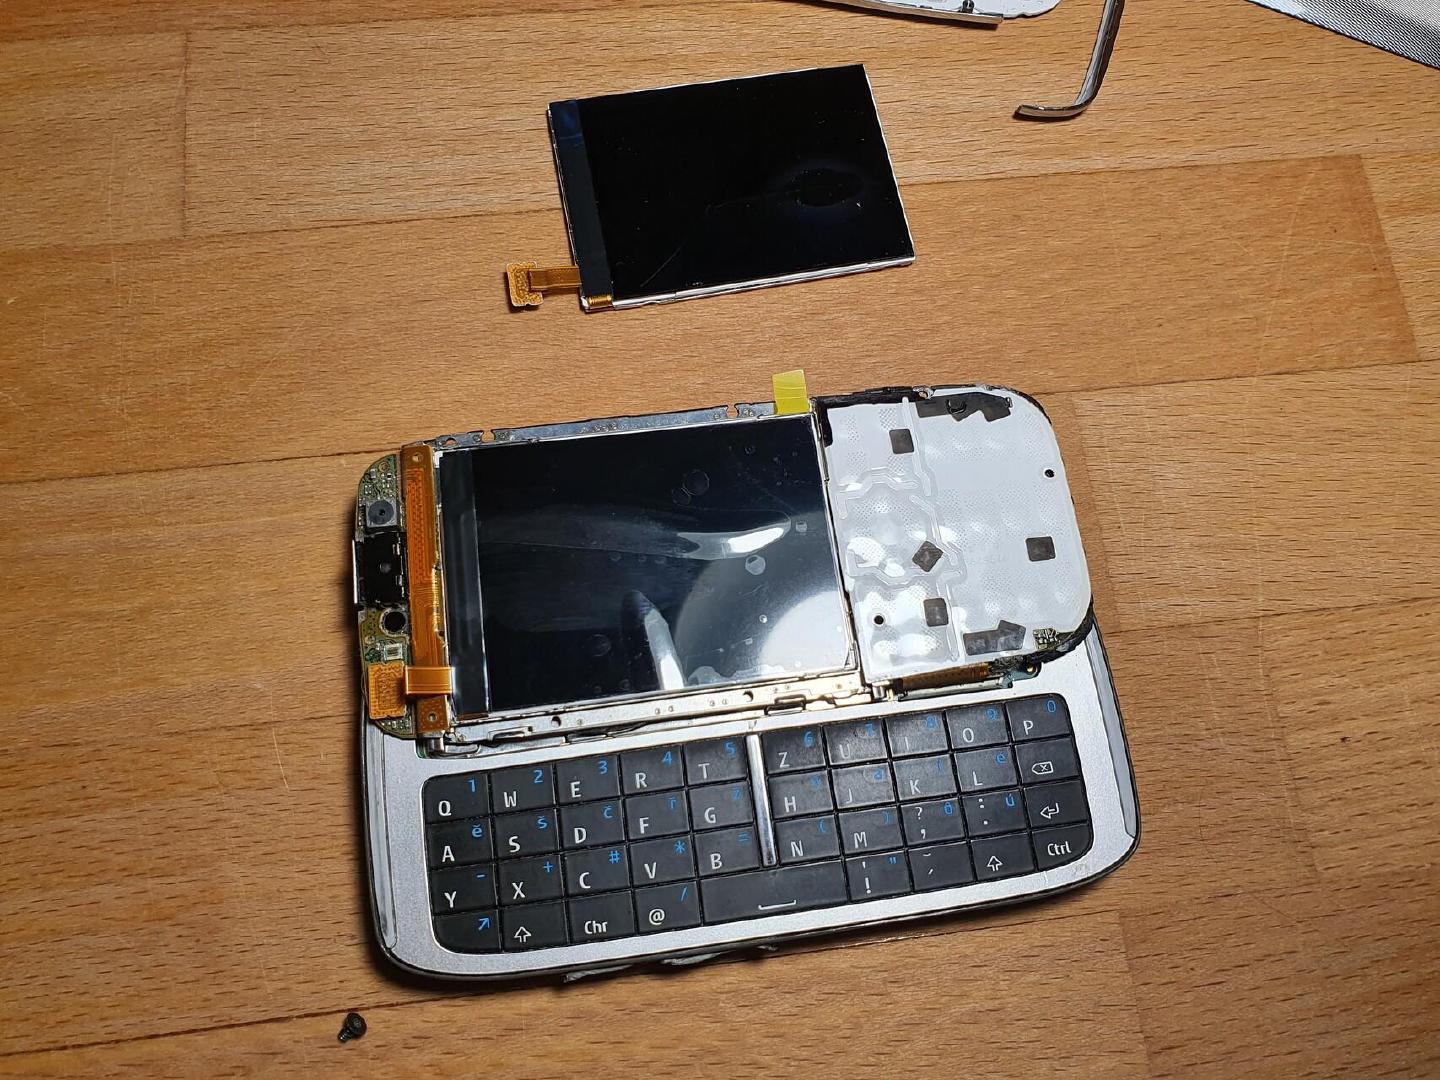 The disassembled phone with the new display inserted and the old and broken one in the background.